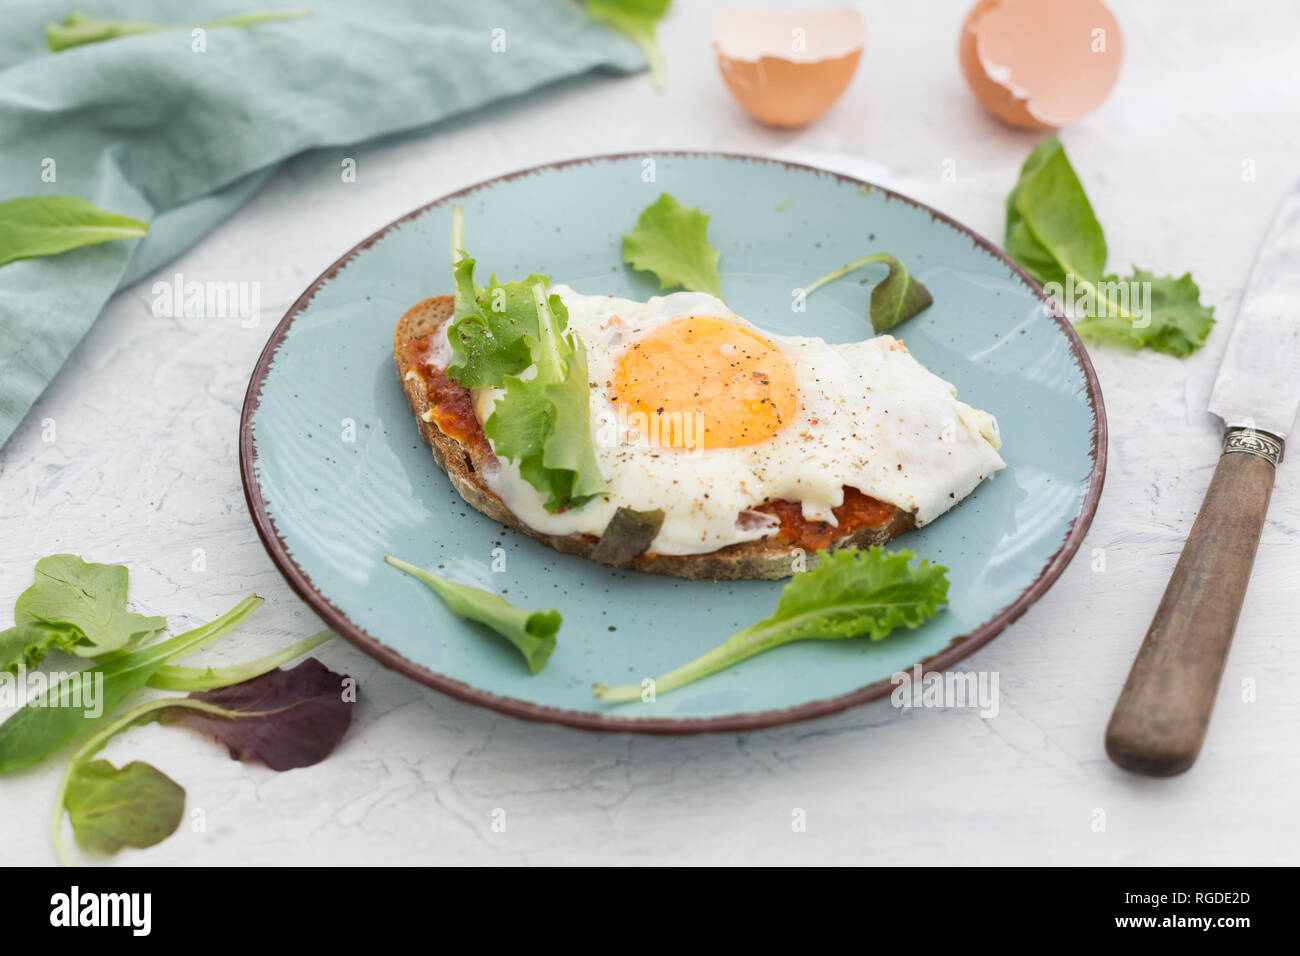 Fried egg on slice of brown bread coated with paprika cream on plate Stock Photo